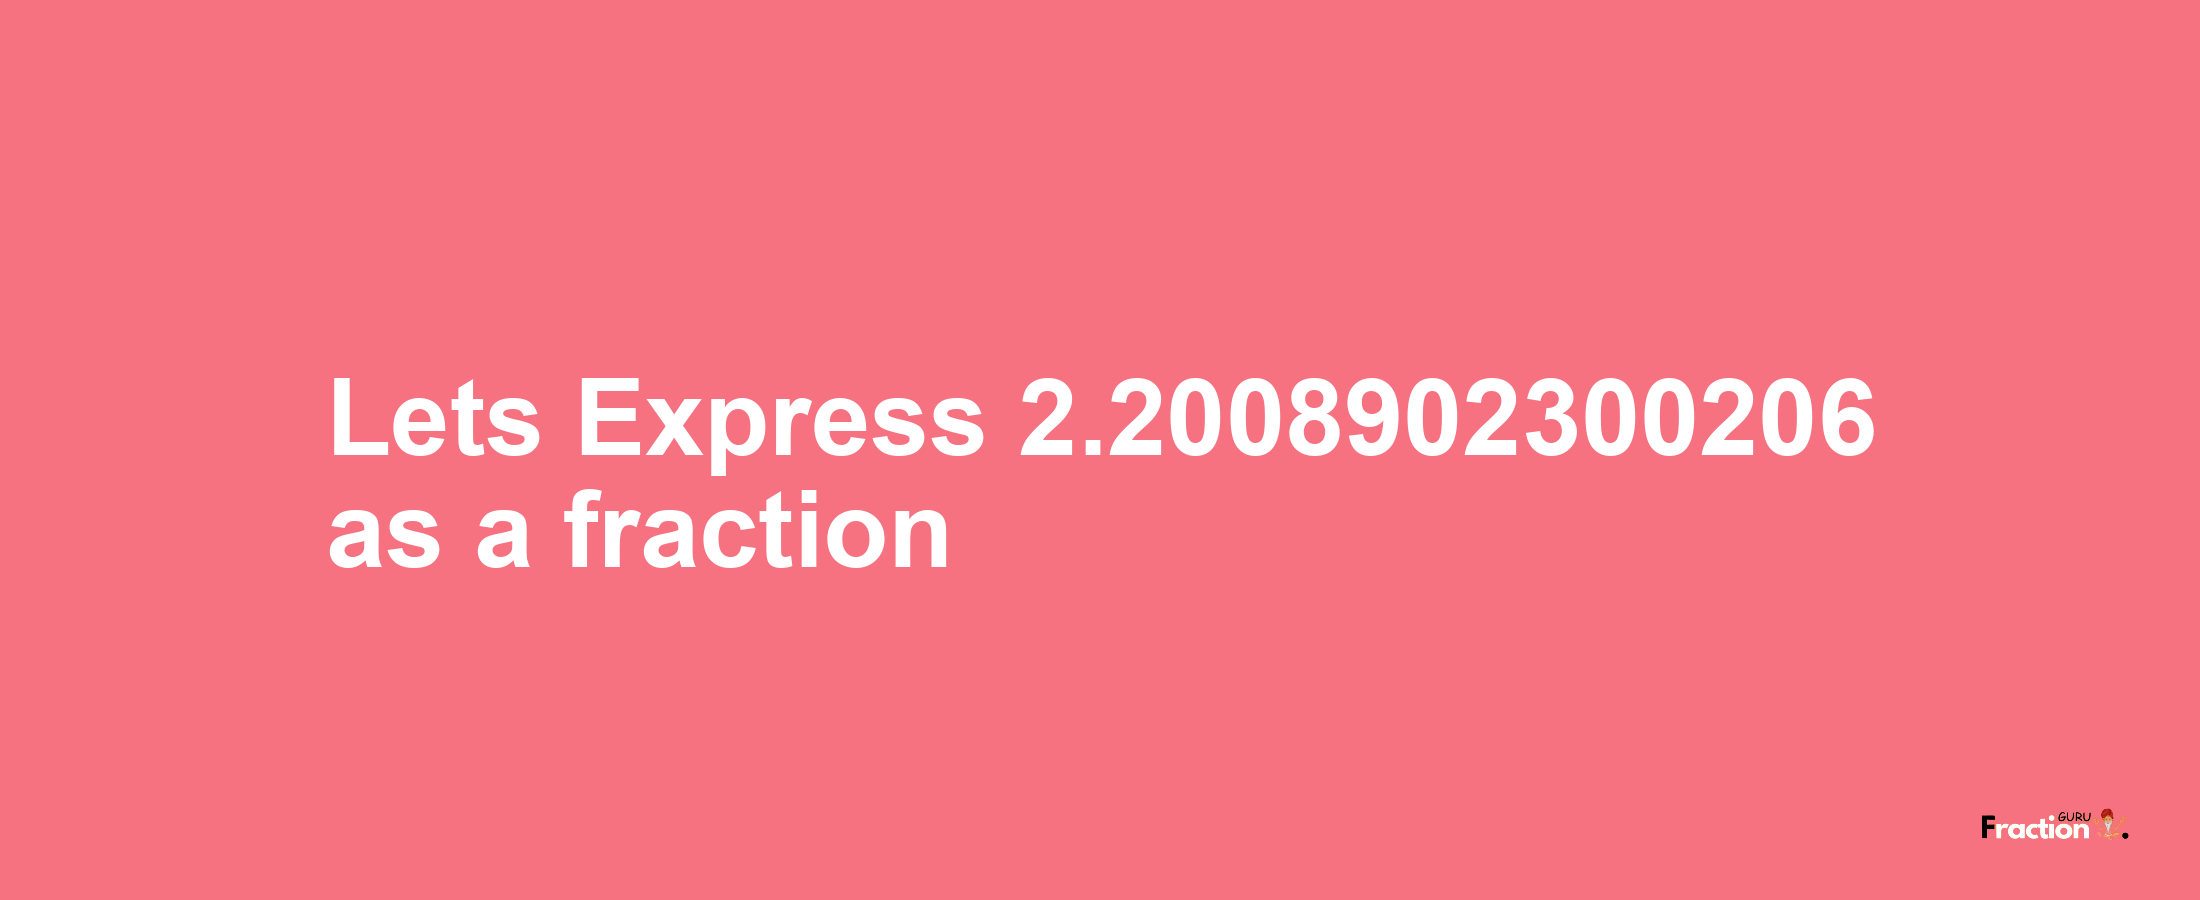 Lets Express 2.2008902300206 as afraction